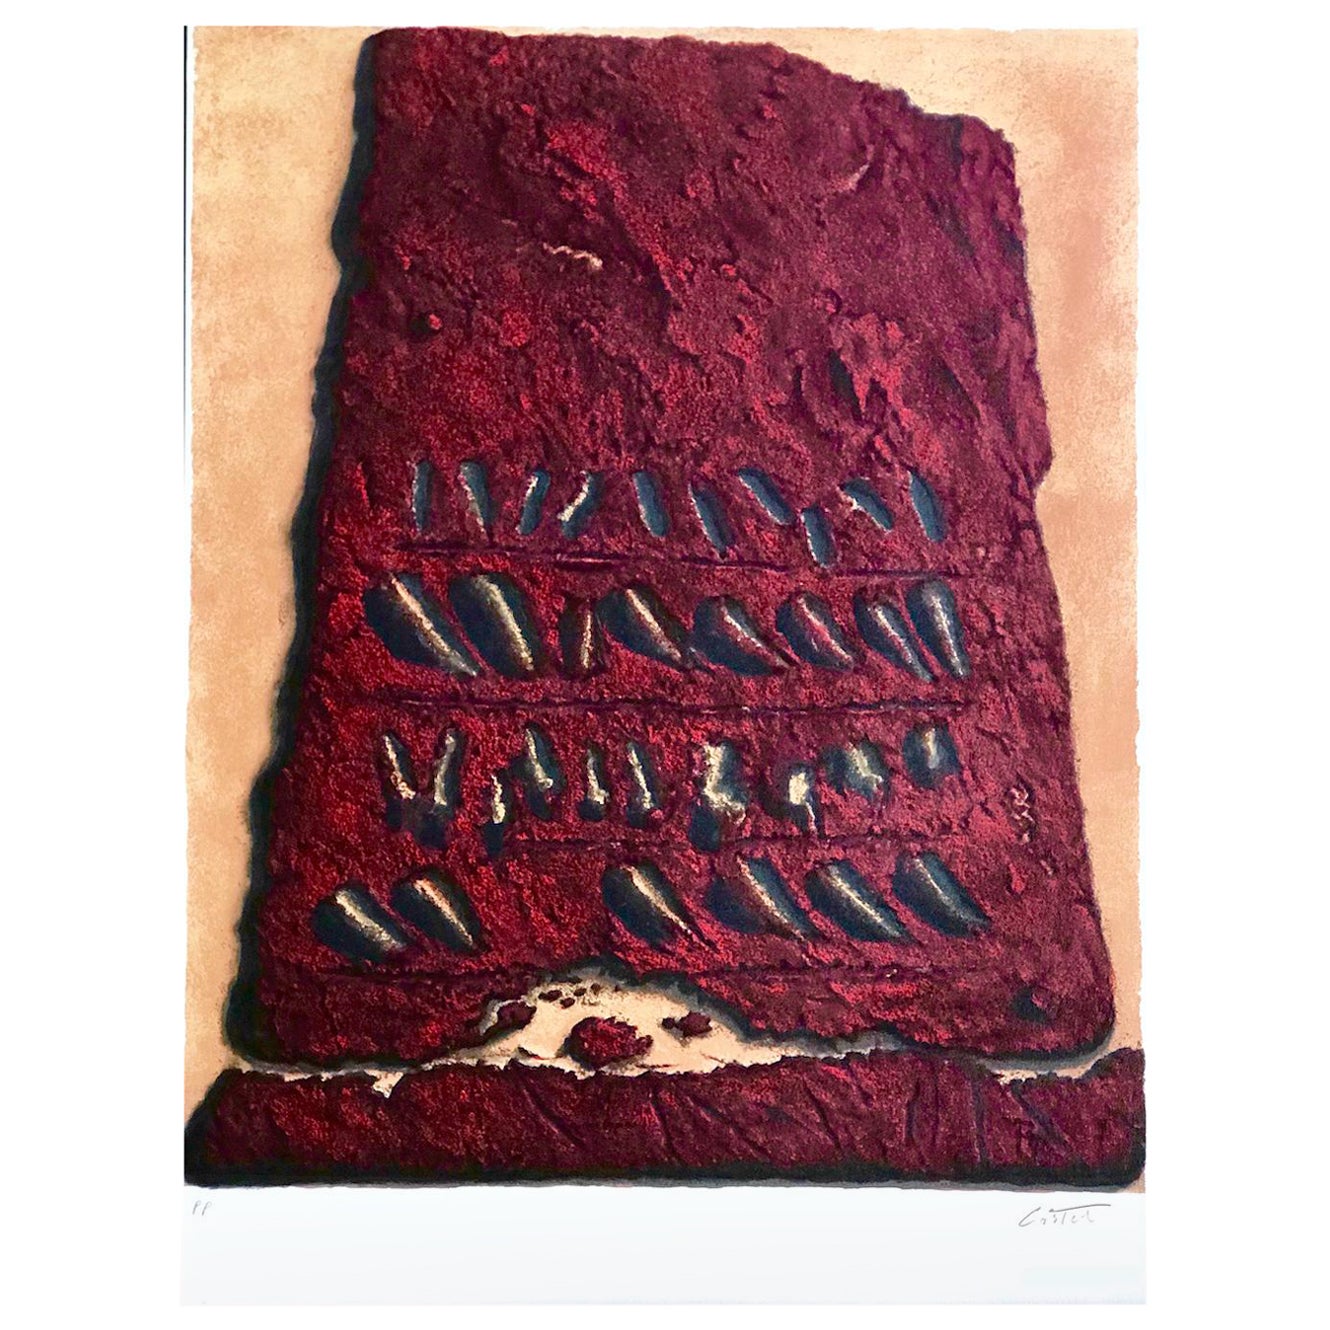 Moshe Castel Abstract Print - SECRET WRITINGS Signed Lithograph, Ancient Script, Red Stone Tablet